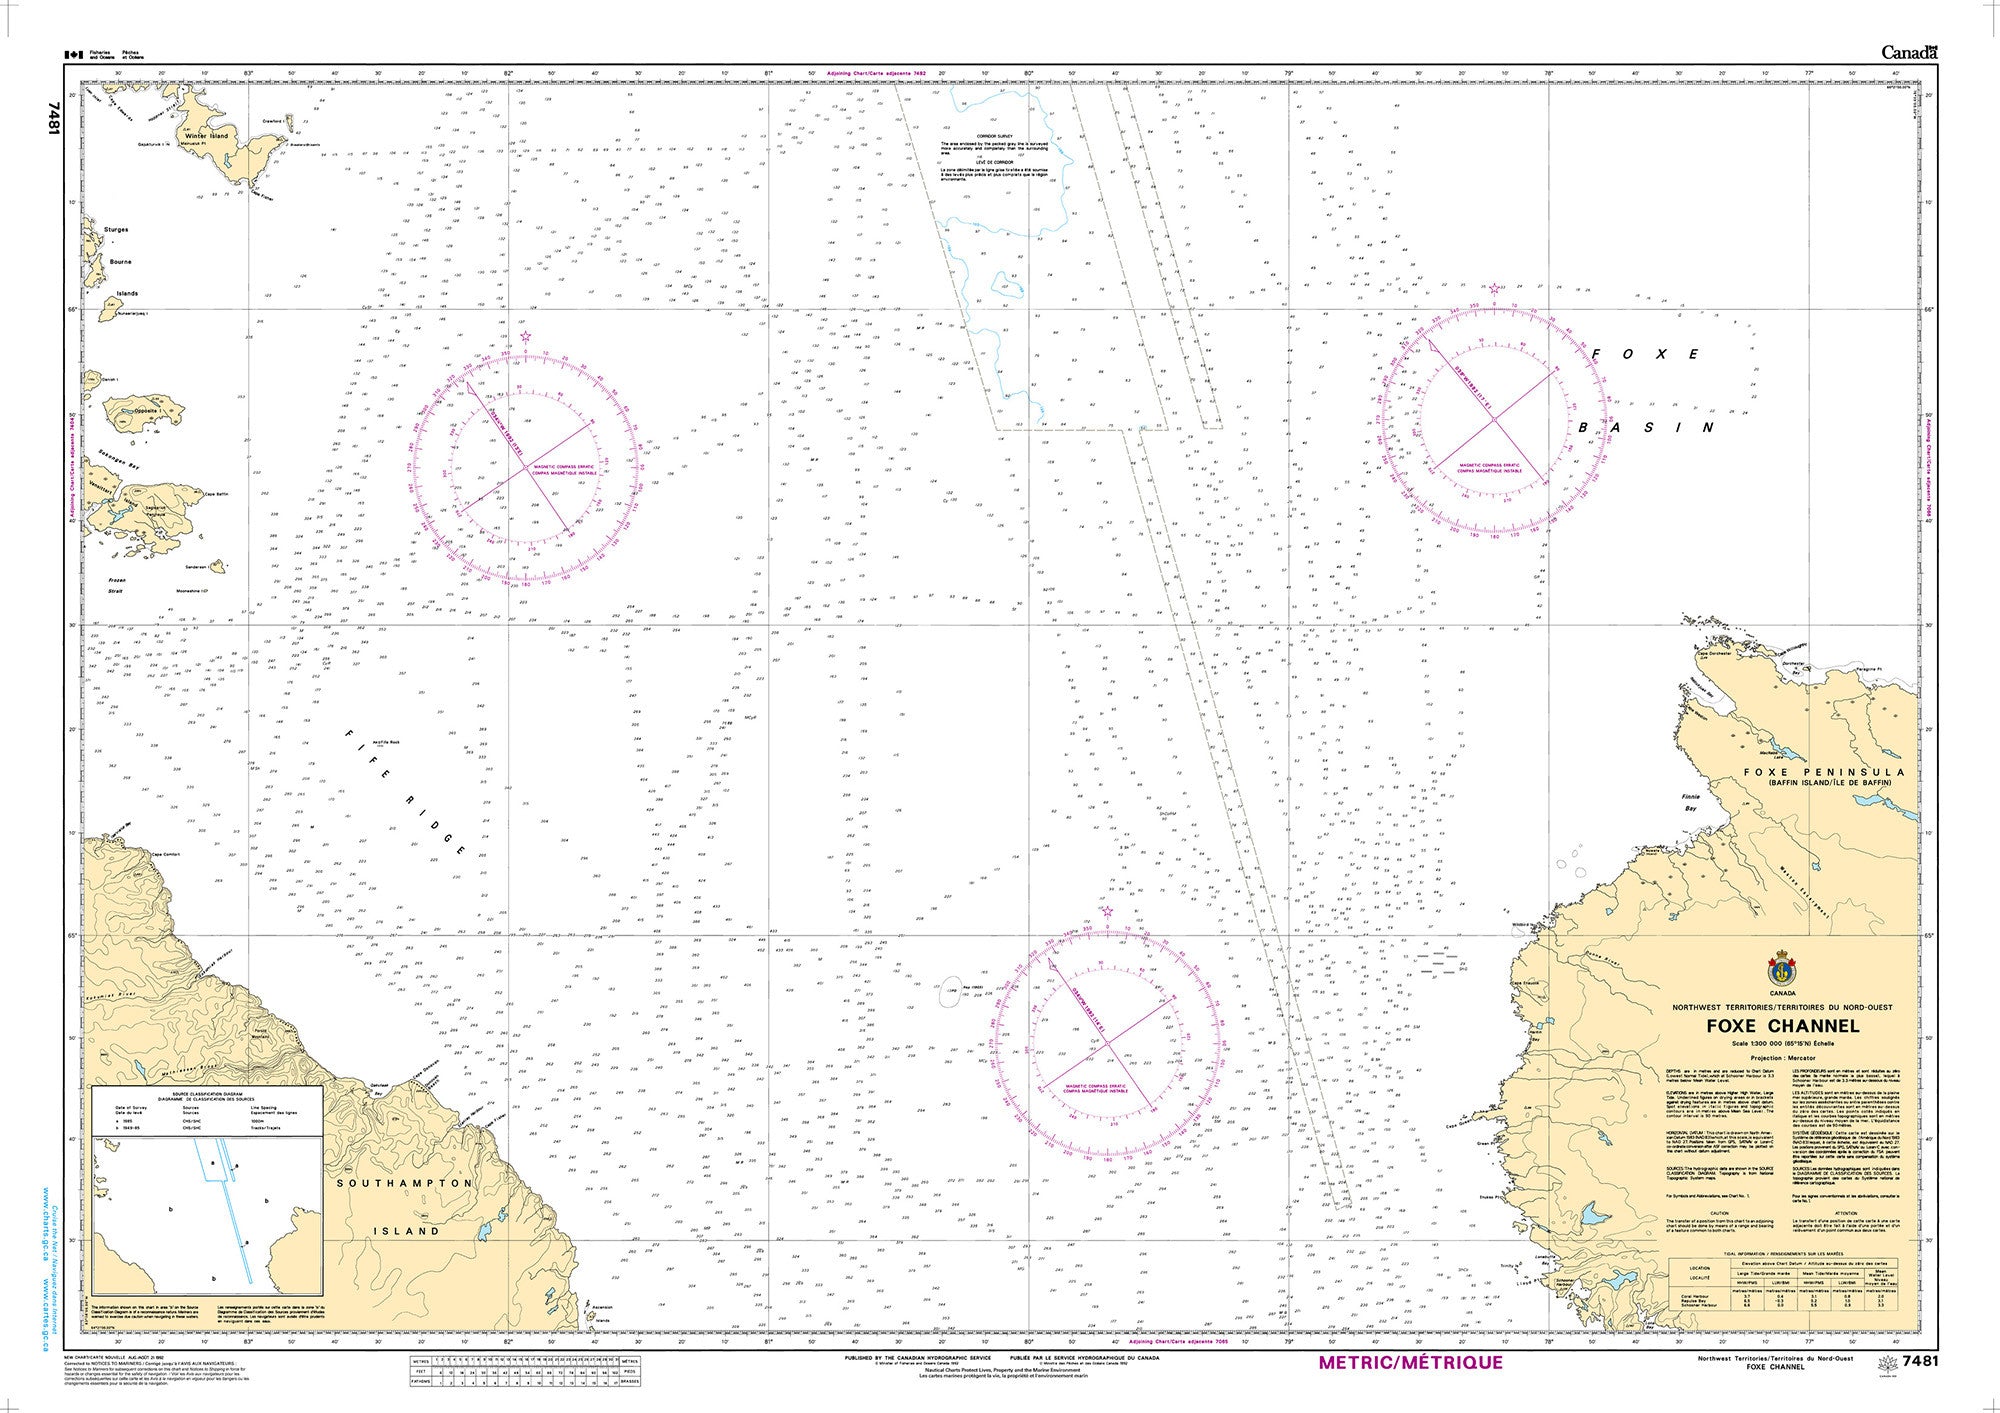 Canadian Hydrographic Service Nautical Chart CHS7481: Foxe Channel